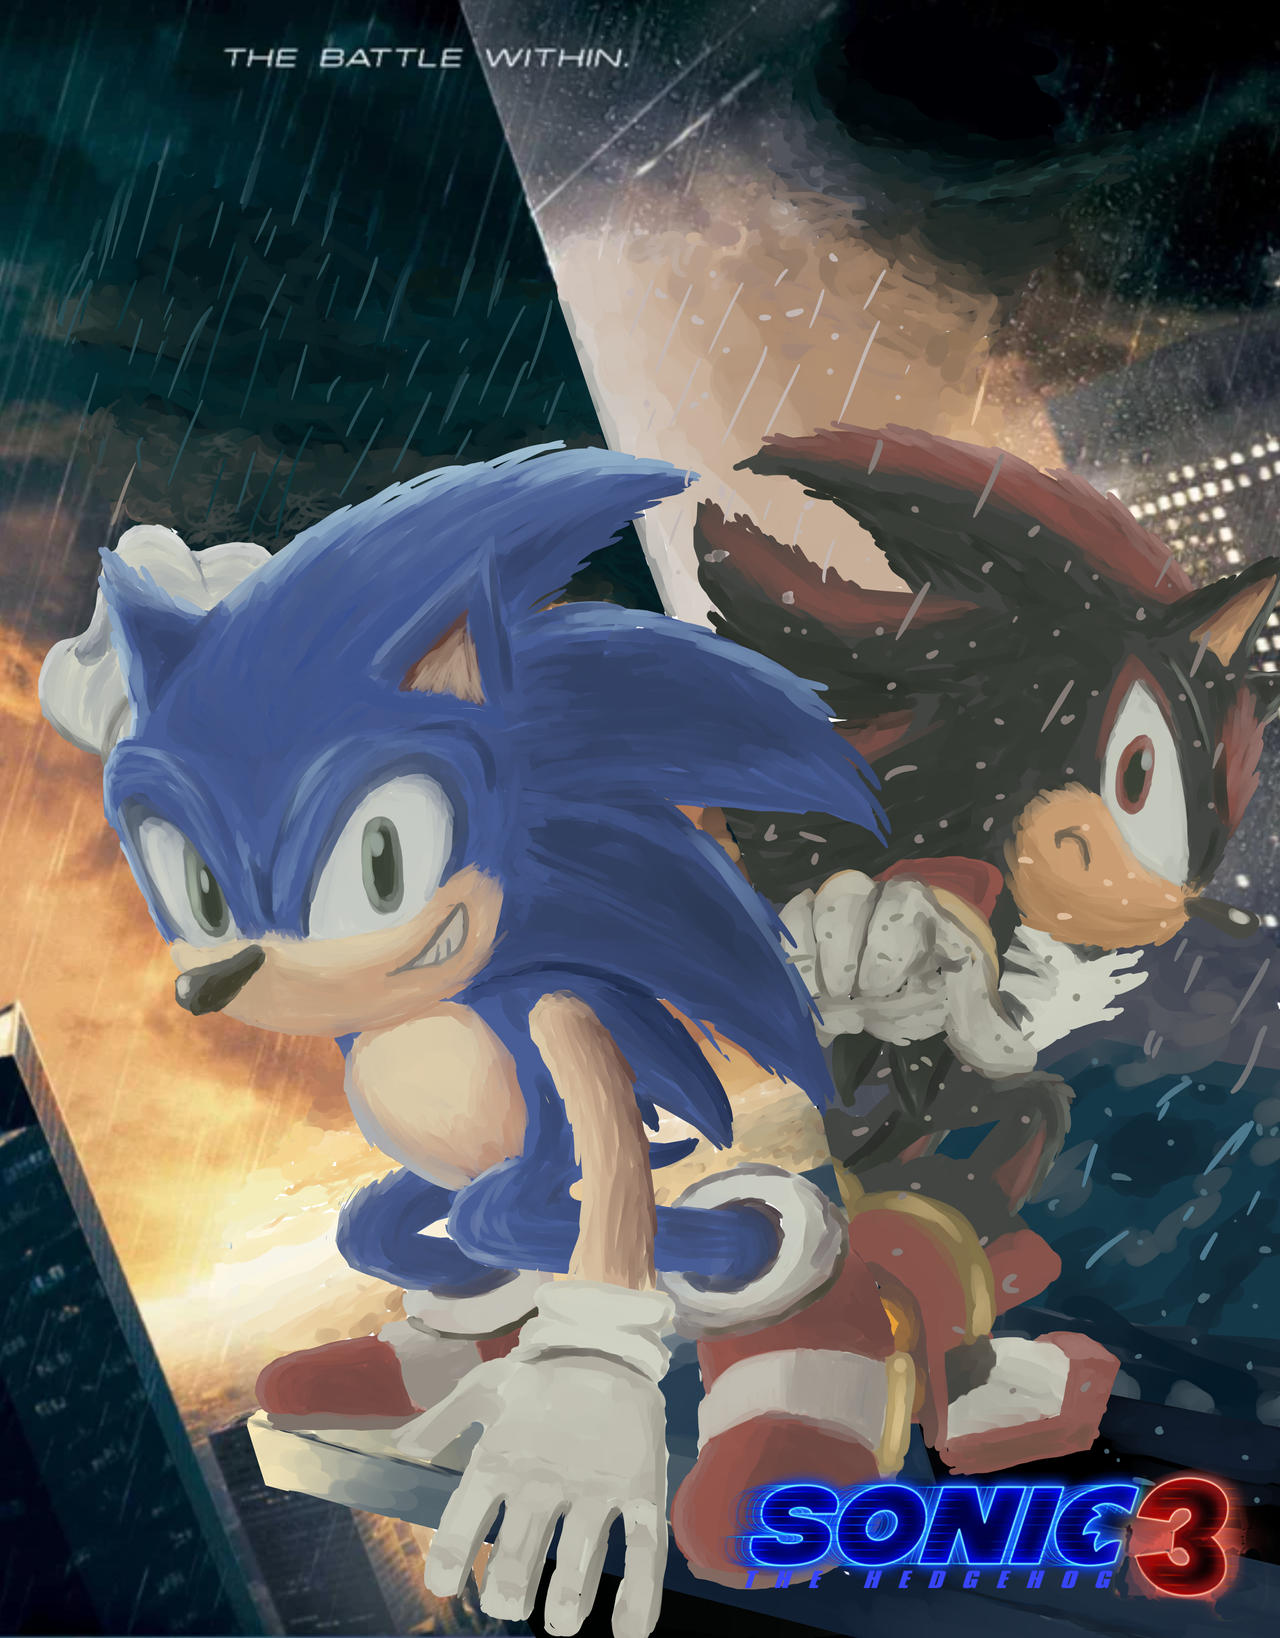 Sonic movie 3 poster (Changing fate) by Mattsupersonic32 on DeviantArt